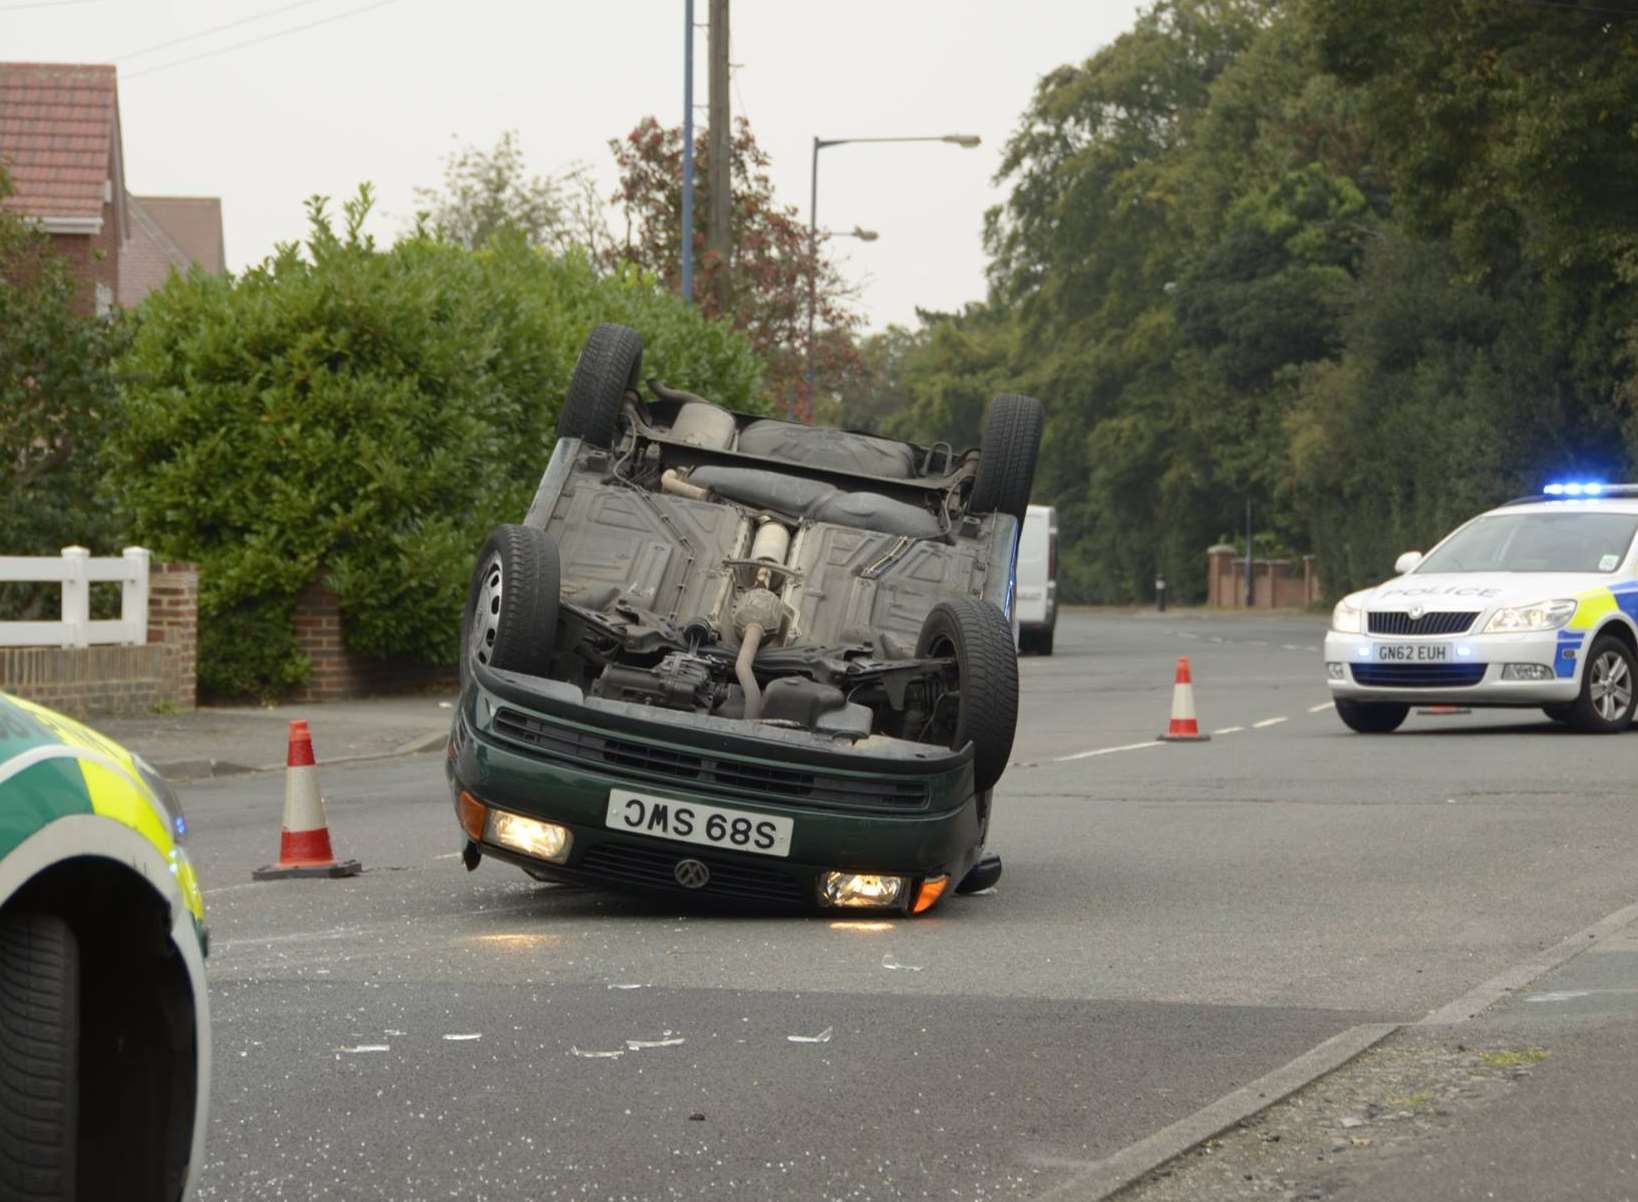 A car was flipped over after an accident in Singlewell Road